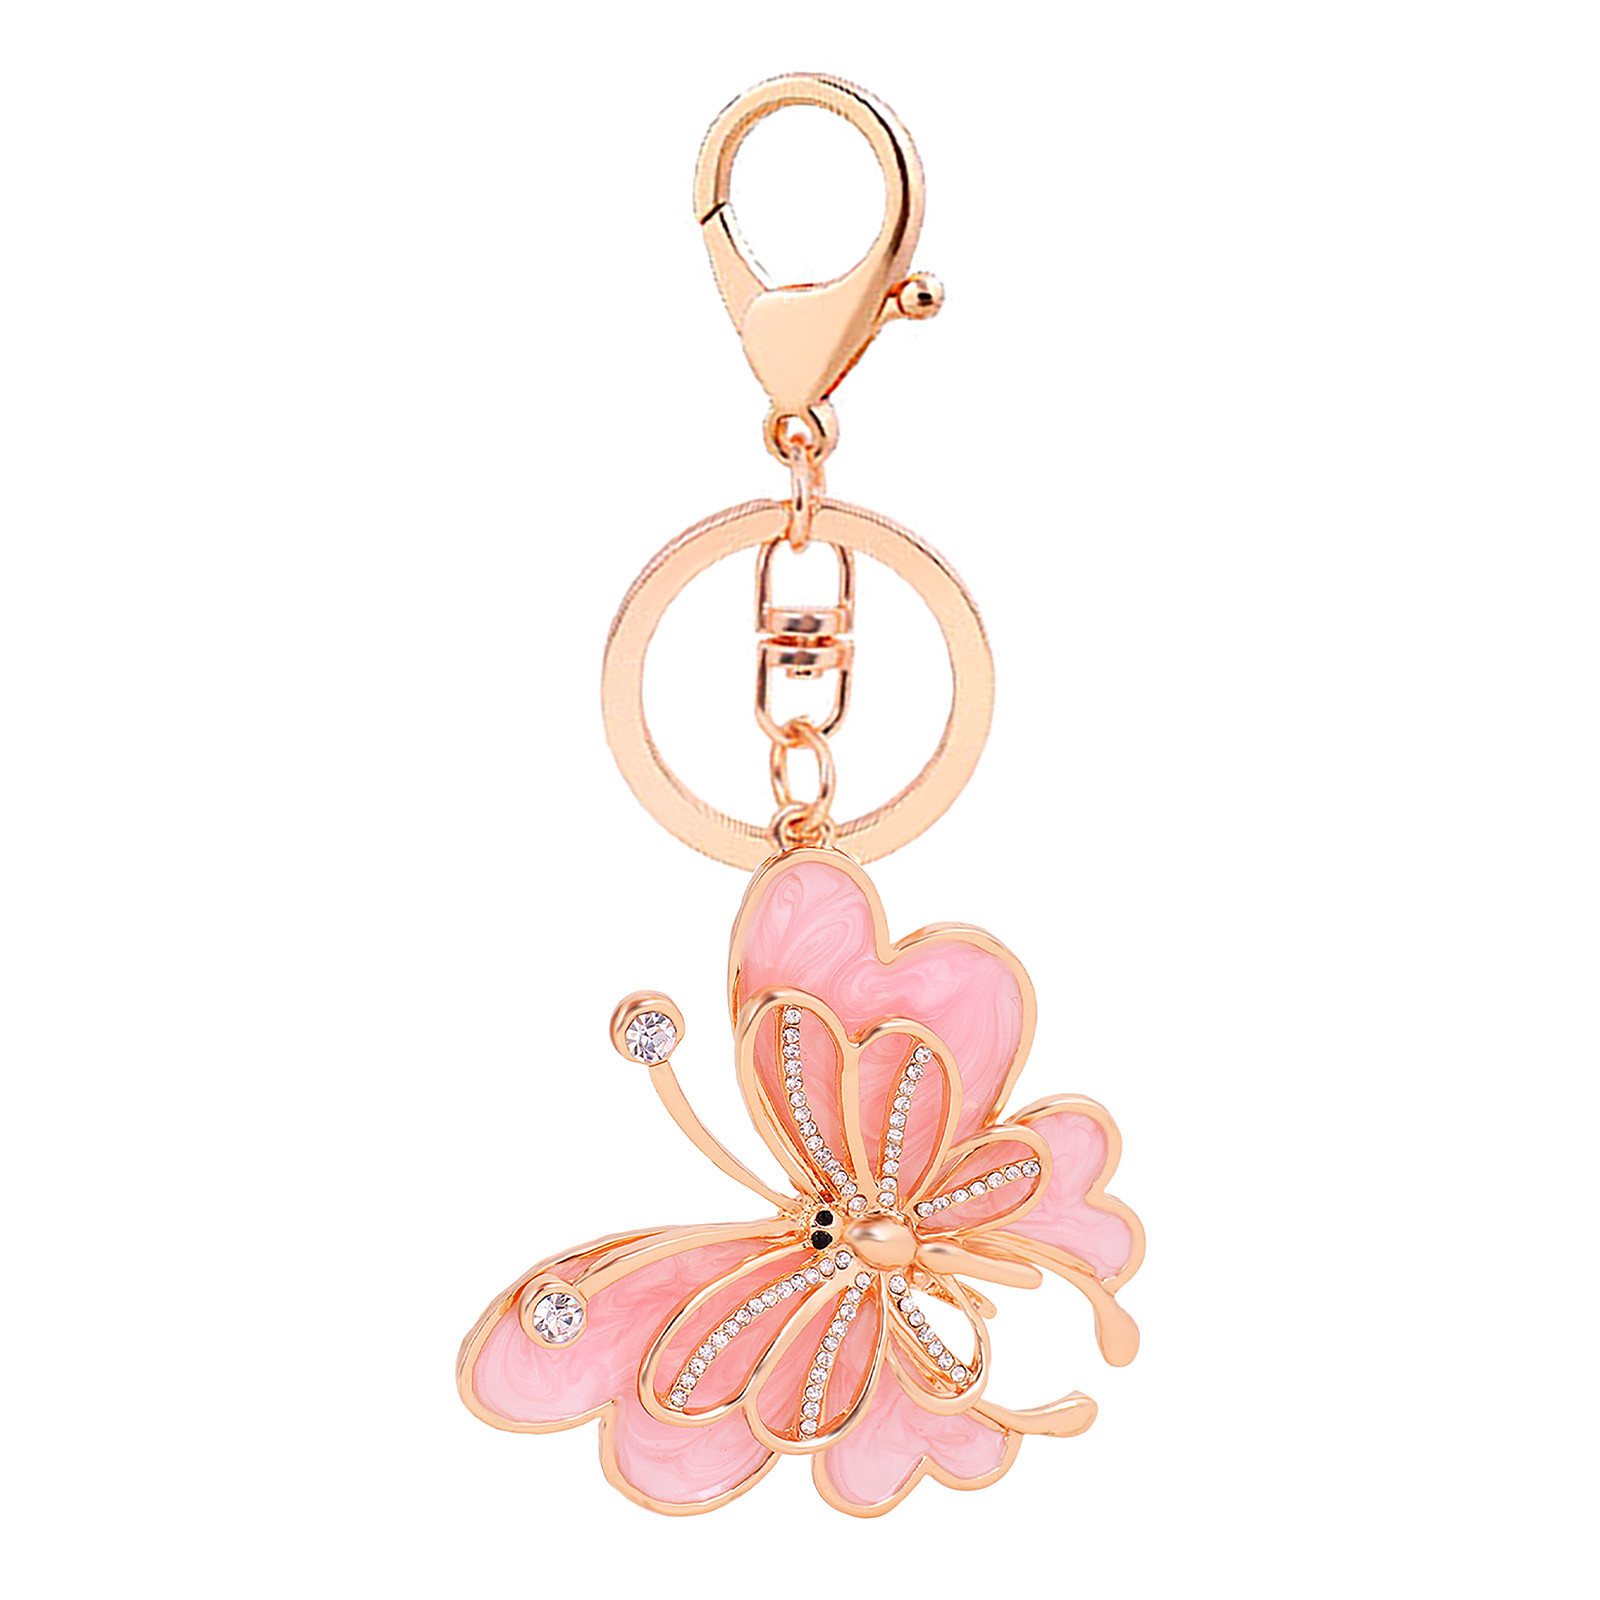 Clearance! Shiogb Desktop Ornament, Rose Key Charm and Suitable Cute ...